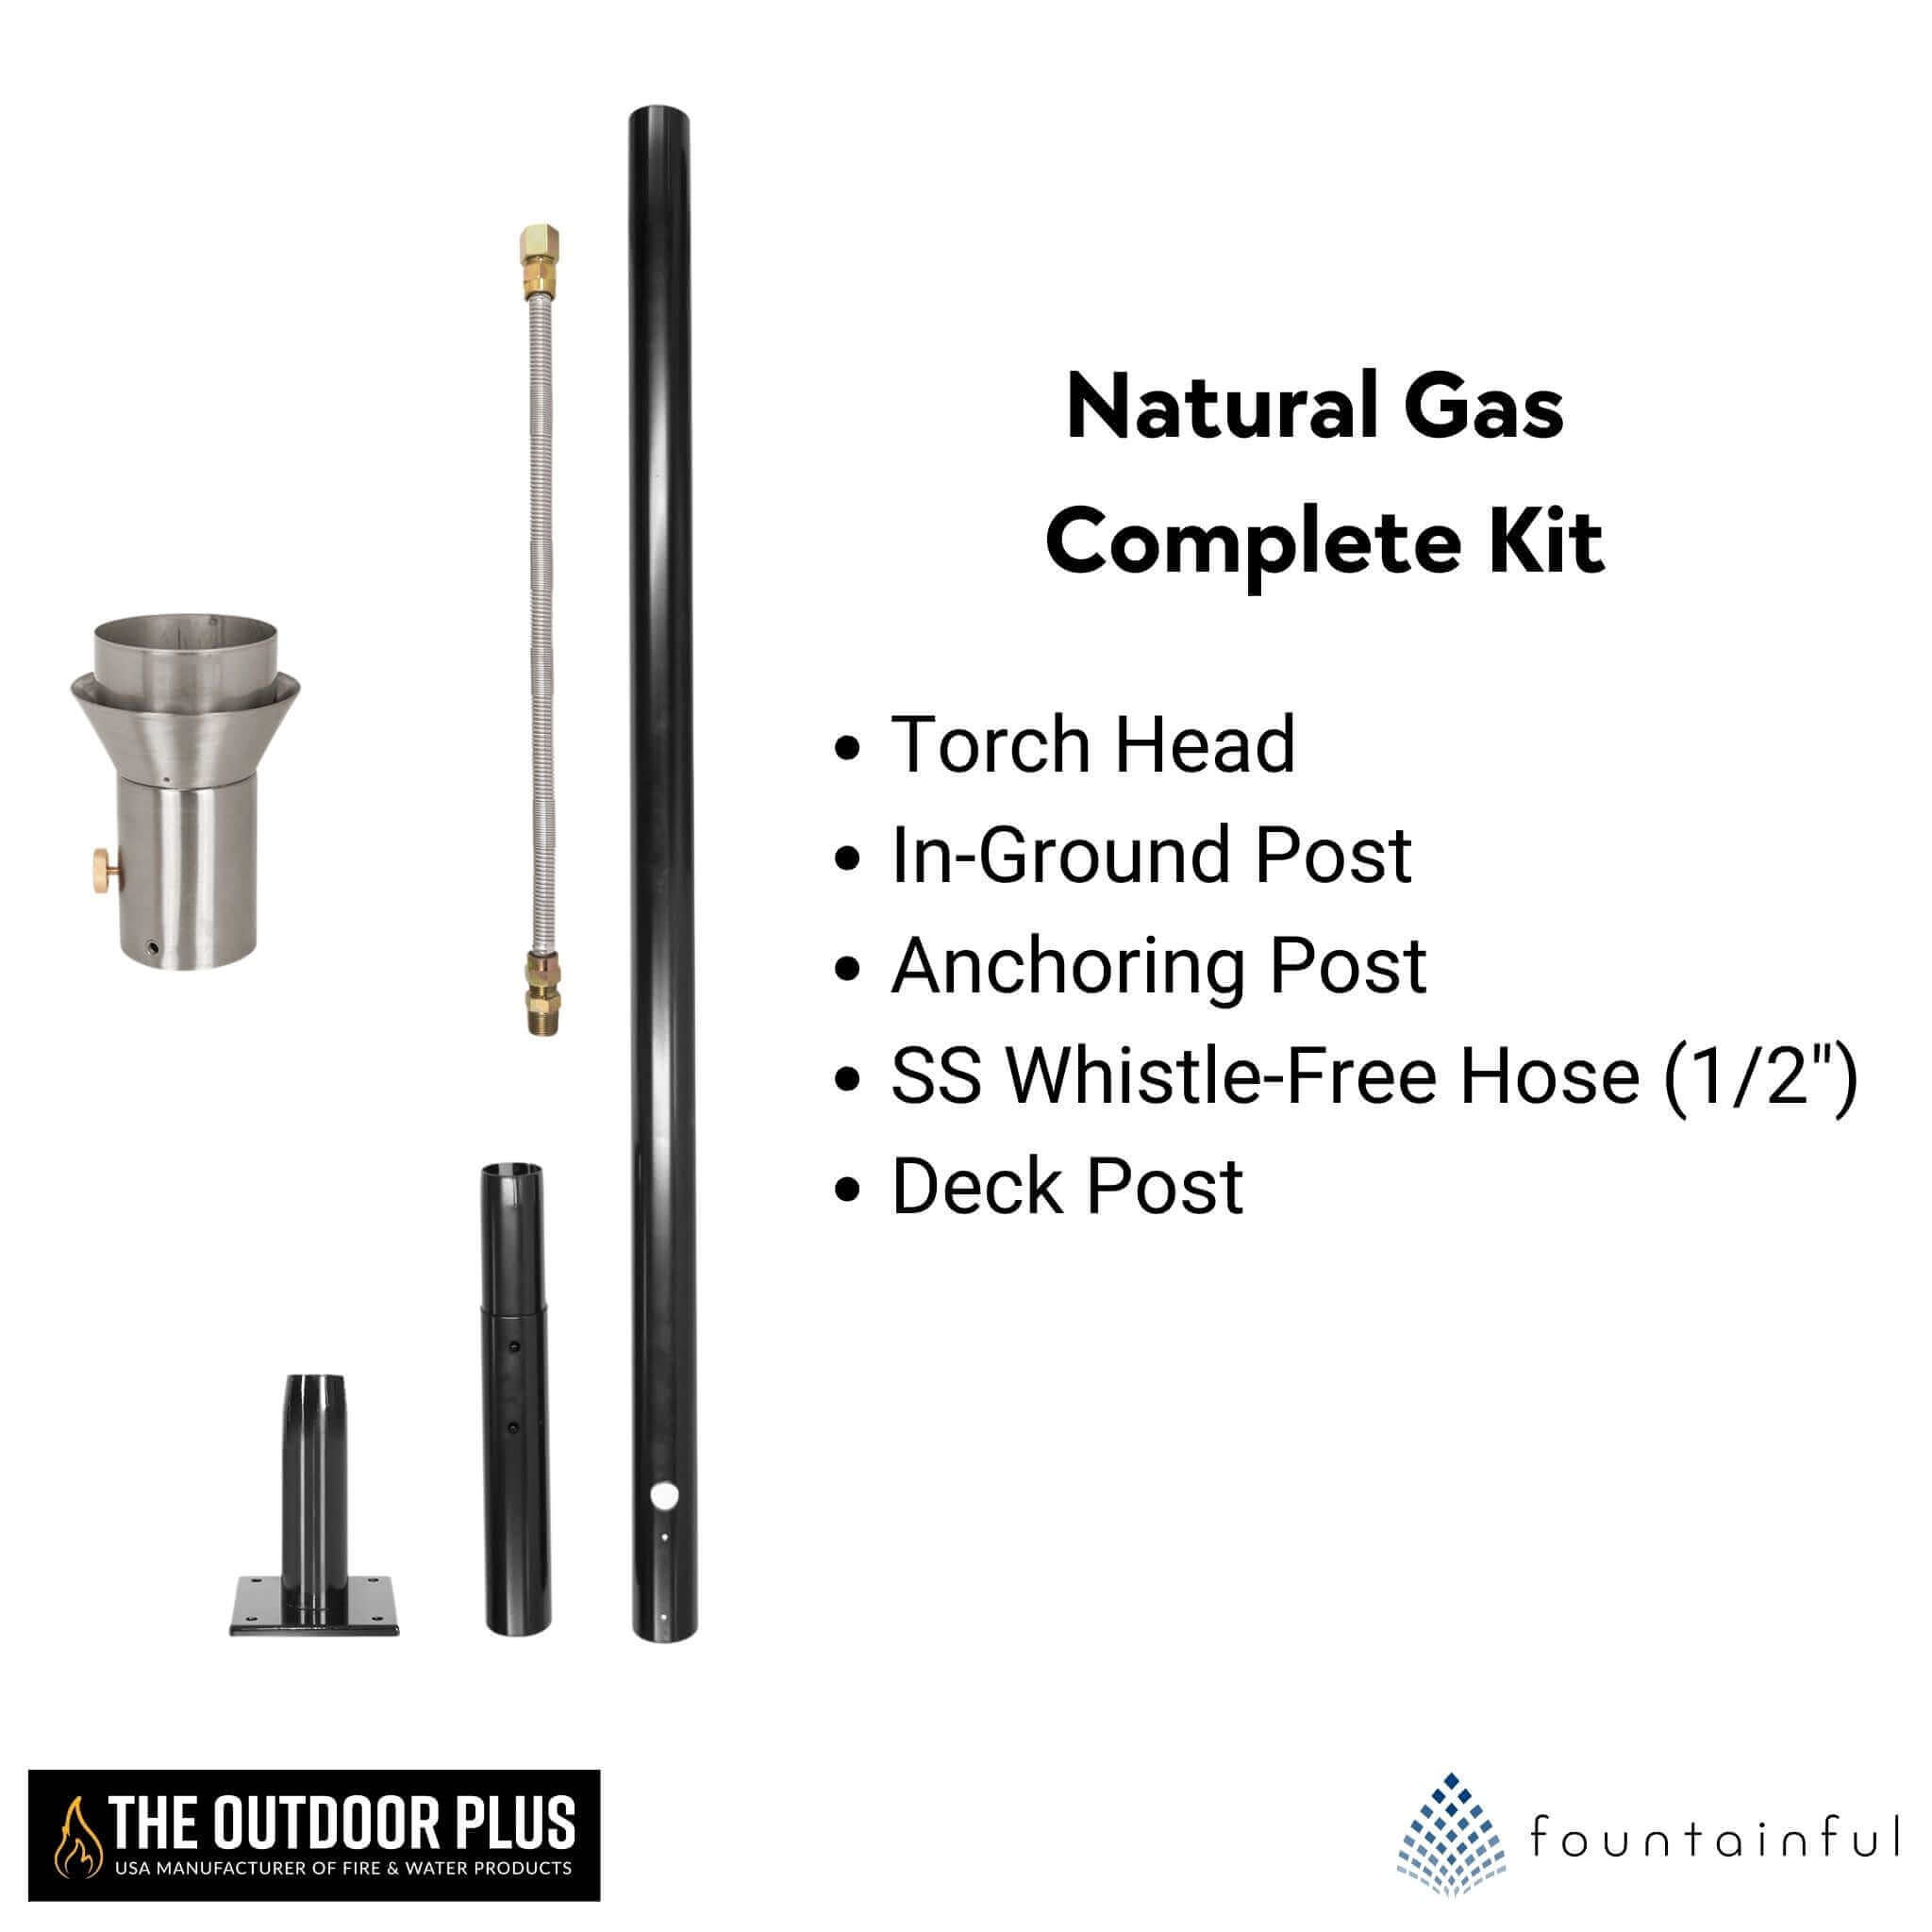 Basket Fire Torch COMPLETE KIT - Stainless Steel - The Outdoor Plus